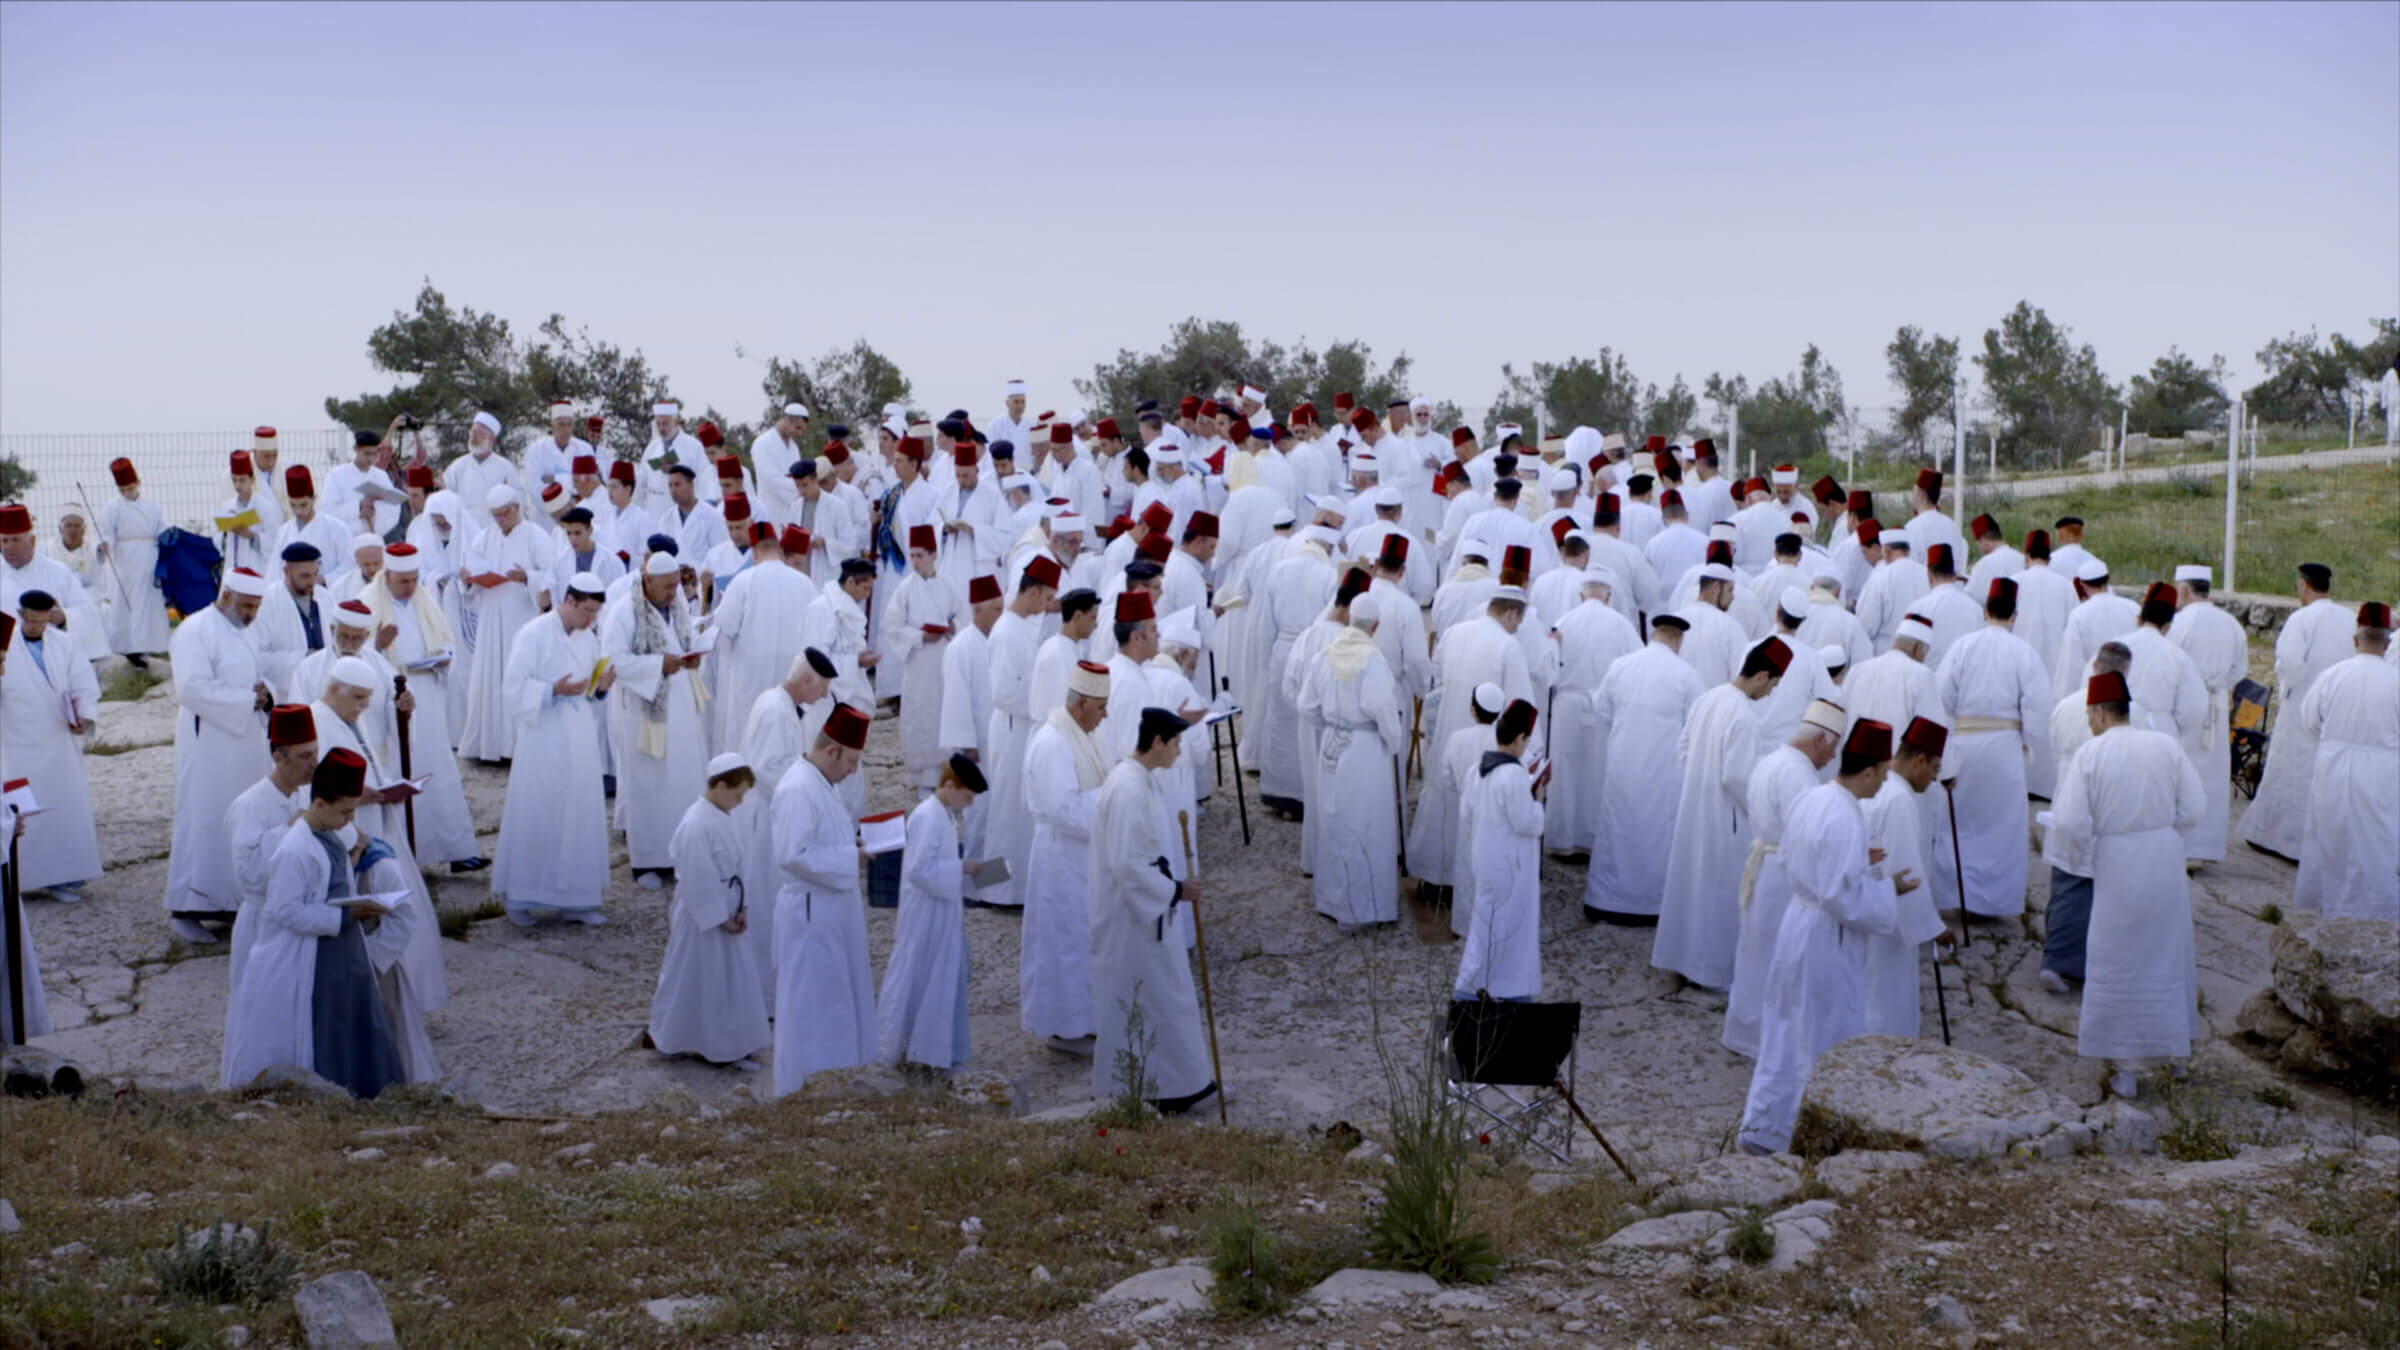 "The Samaritans" focuses on a community of less than a thousand who are split between two communities: one in Holon, the other in Nablus next to Mount Gerizim in Samaria.